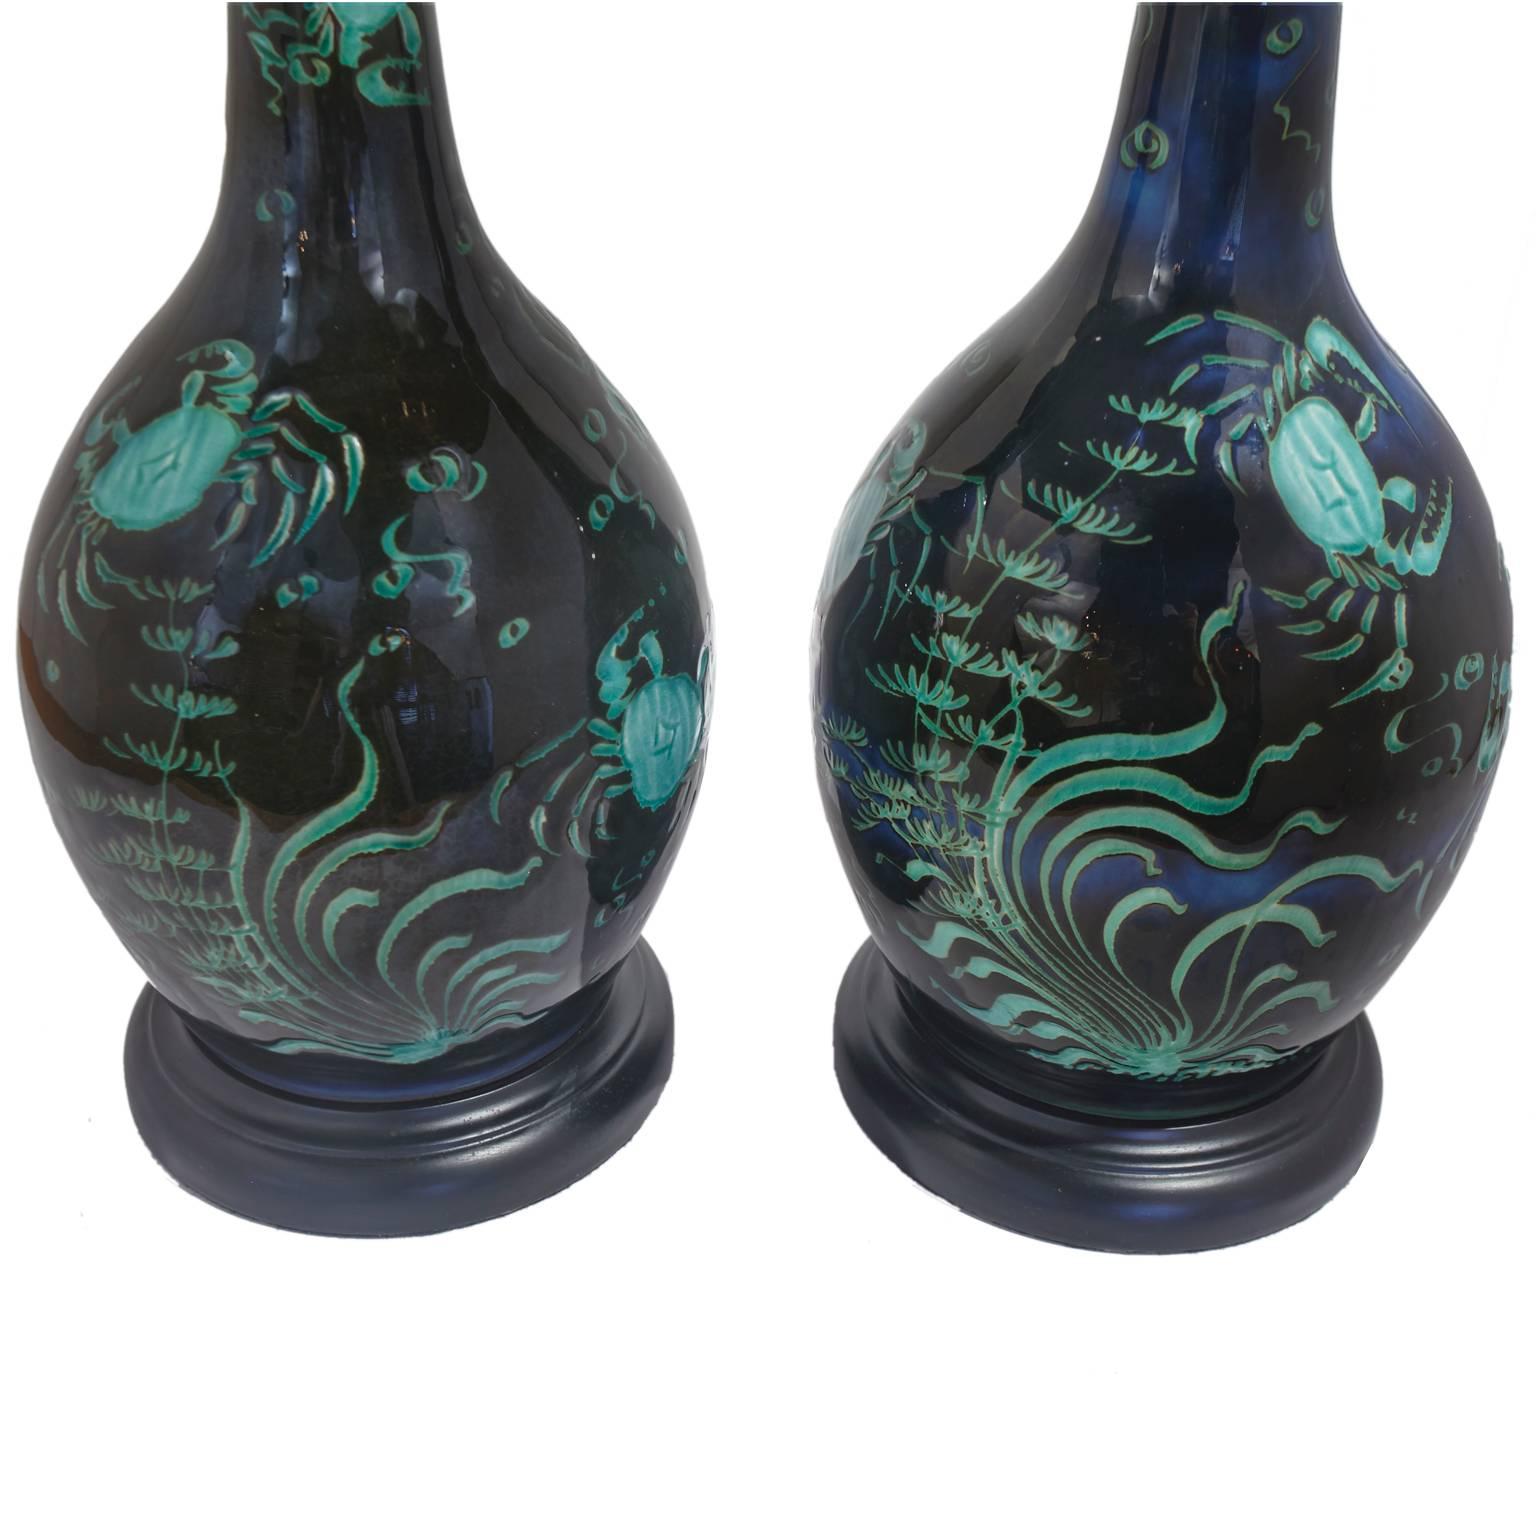 20th Century Pair of Deep Blue Ceramic Lamps with Turquoise Green Crabs and Ocean Plants